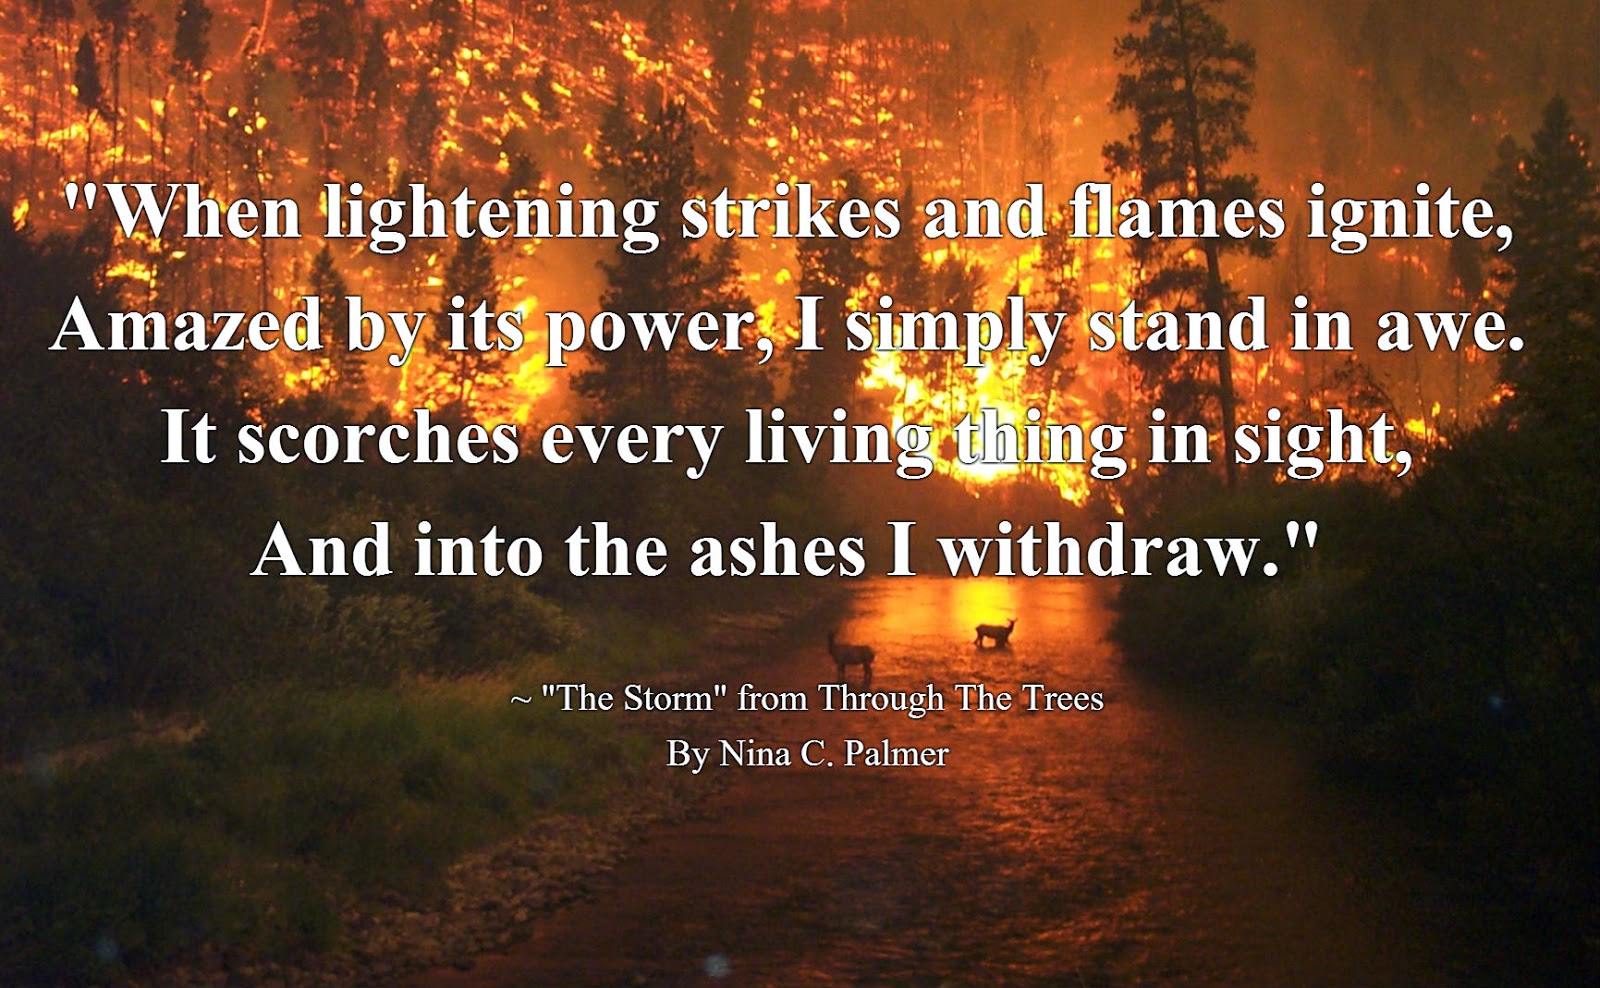 Nina C. Palmer Writing: Quotes from Through the Trees